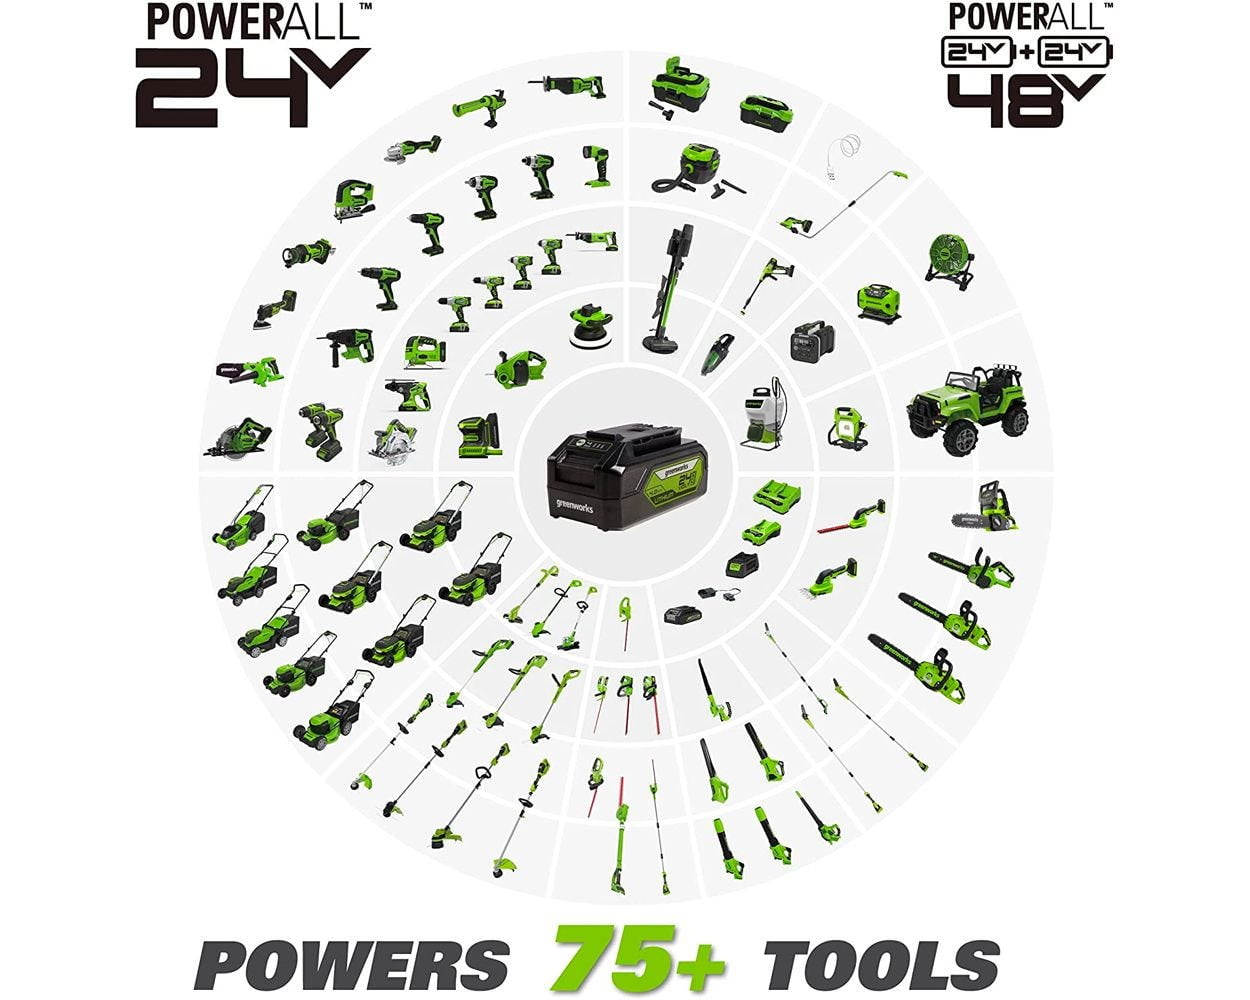 Greenworks 24V Brushless 310 in./lbs Drill / Driver + 1900 in./lbs Impact  Driver Combo Kit, (2) USB (Power Bank) Batteries and Charger Included LED  